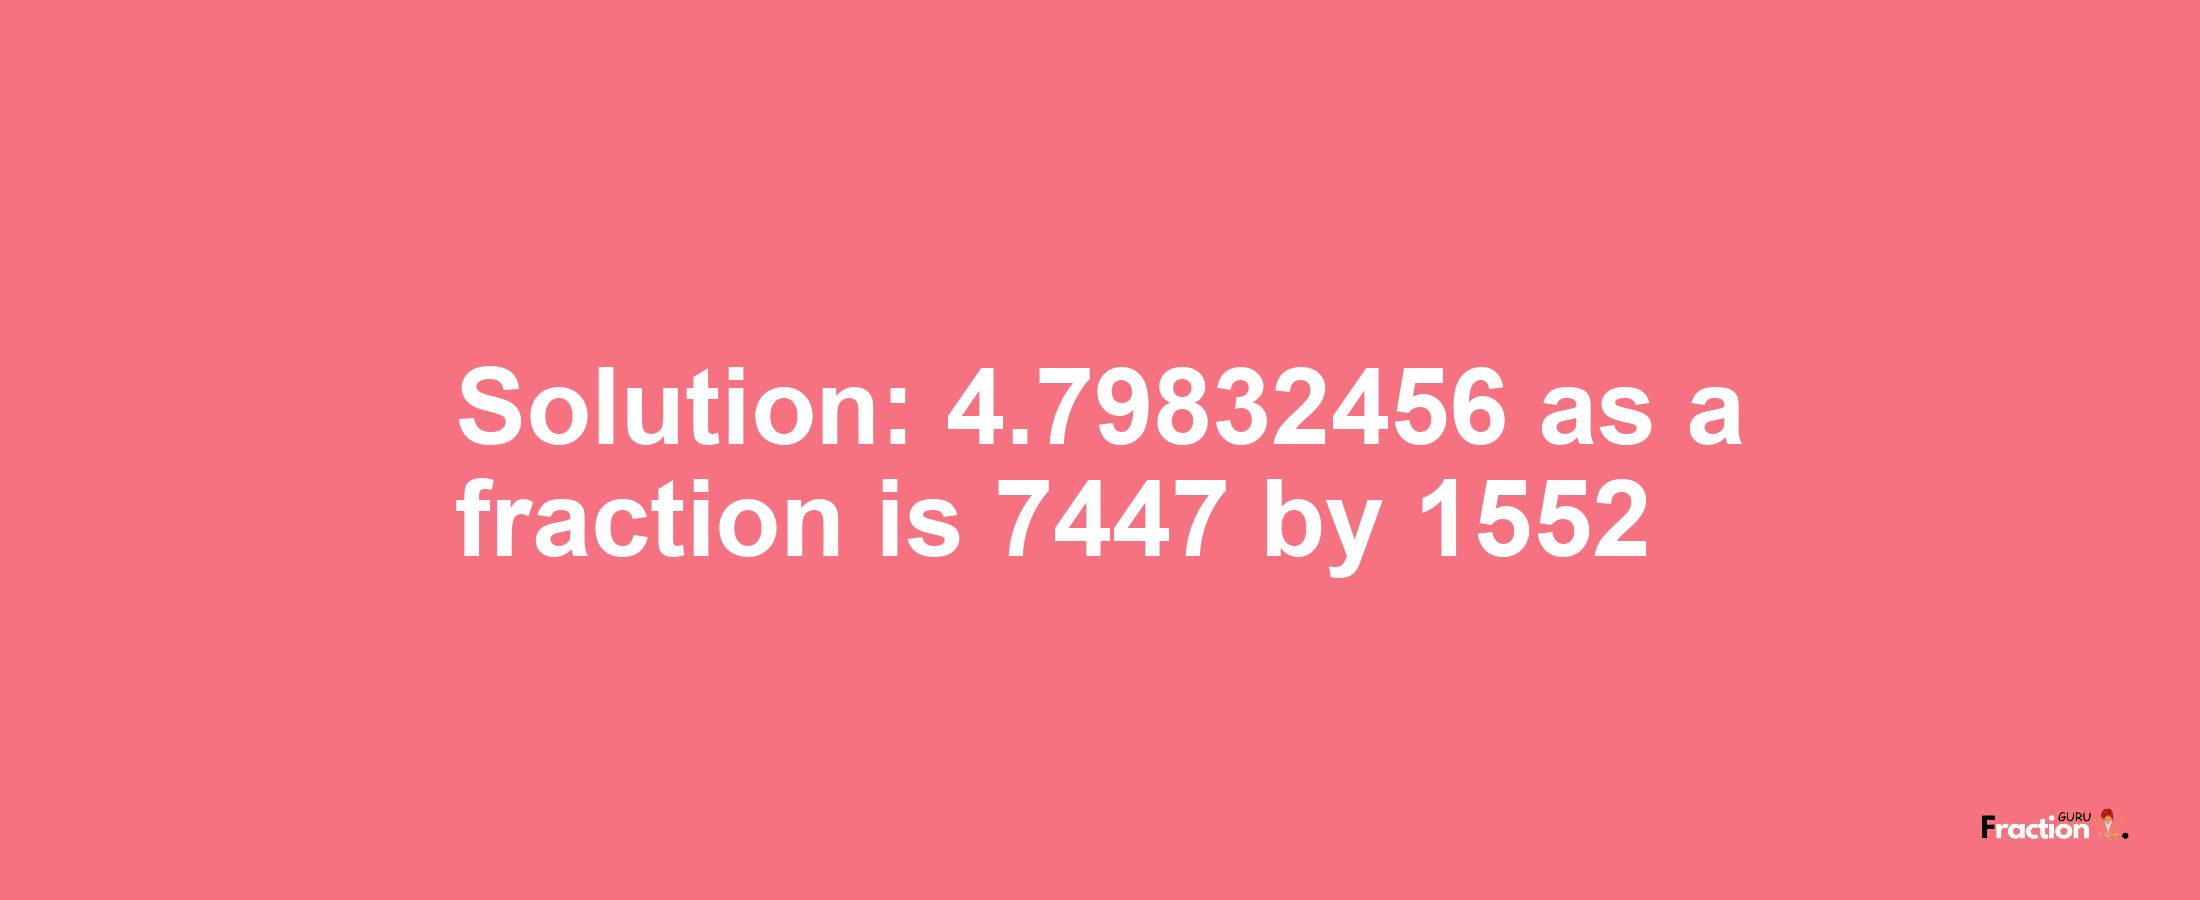 Solution:4.79832456 as a fraction is 7447/1552